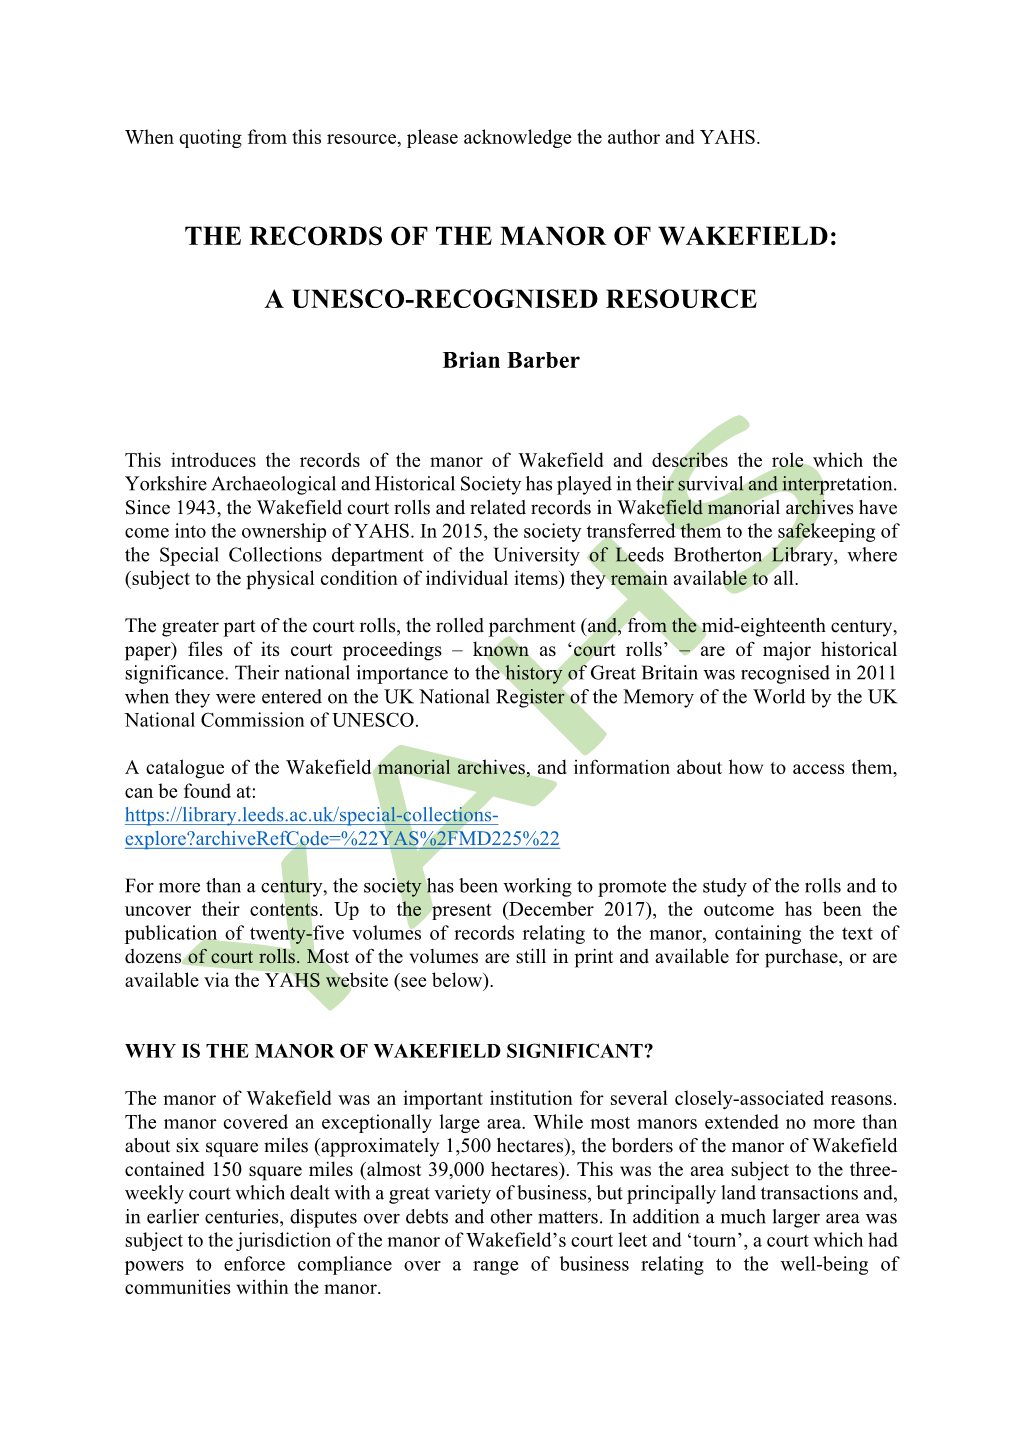 The Records of the Manor of Wakefield: a Unesco